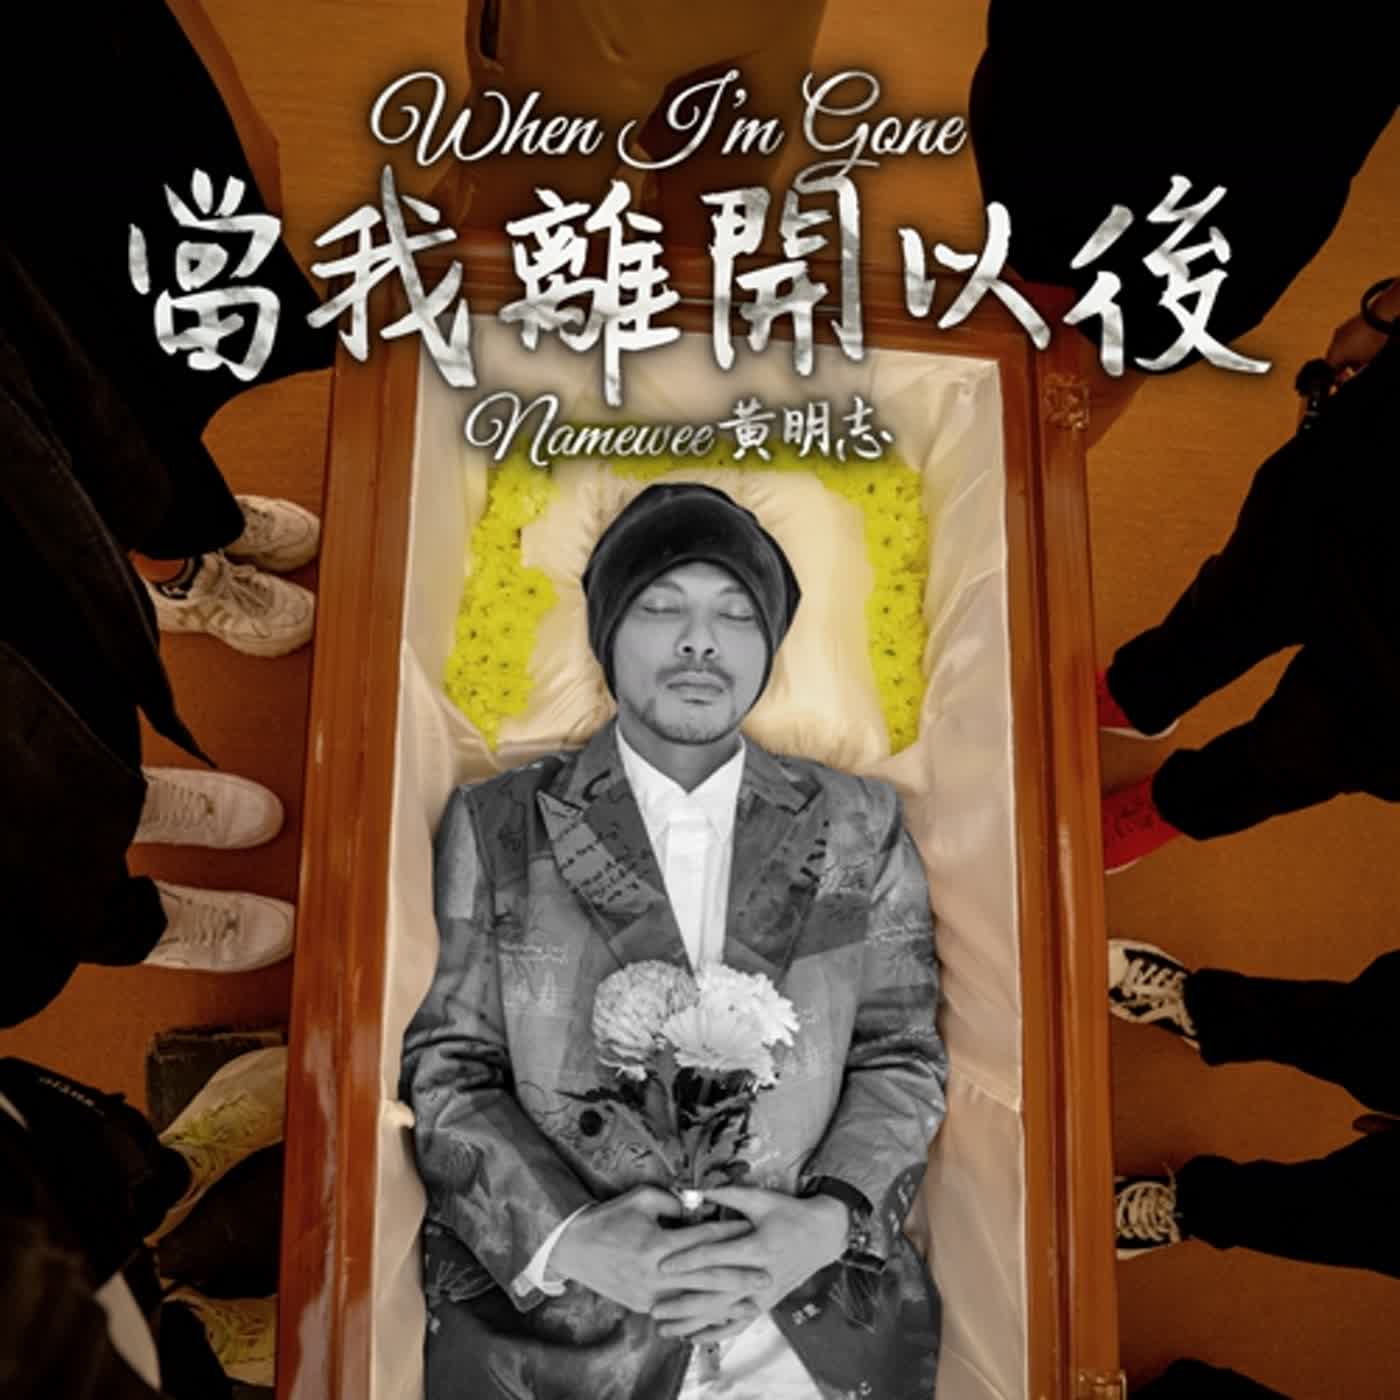 Coffin Dance at Namewee's Funeral?! 黃明志喪禮大玩黑人擡棺梗！走心訴説歌曲心路歷程太催淚...The Making Of【When I'm Gone 當我離開以後】